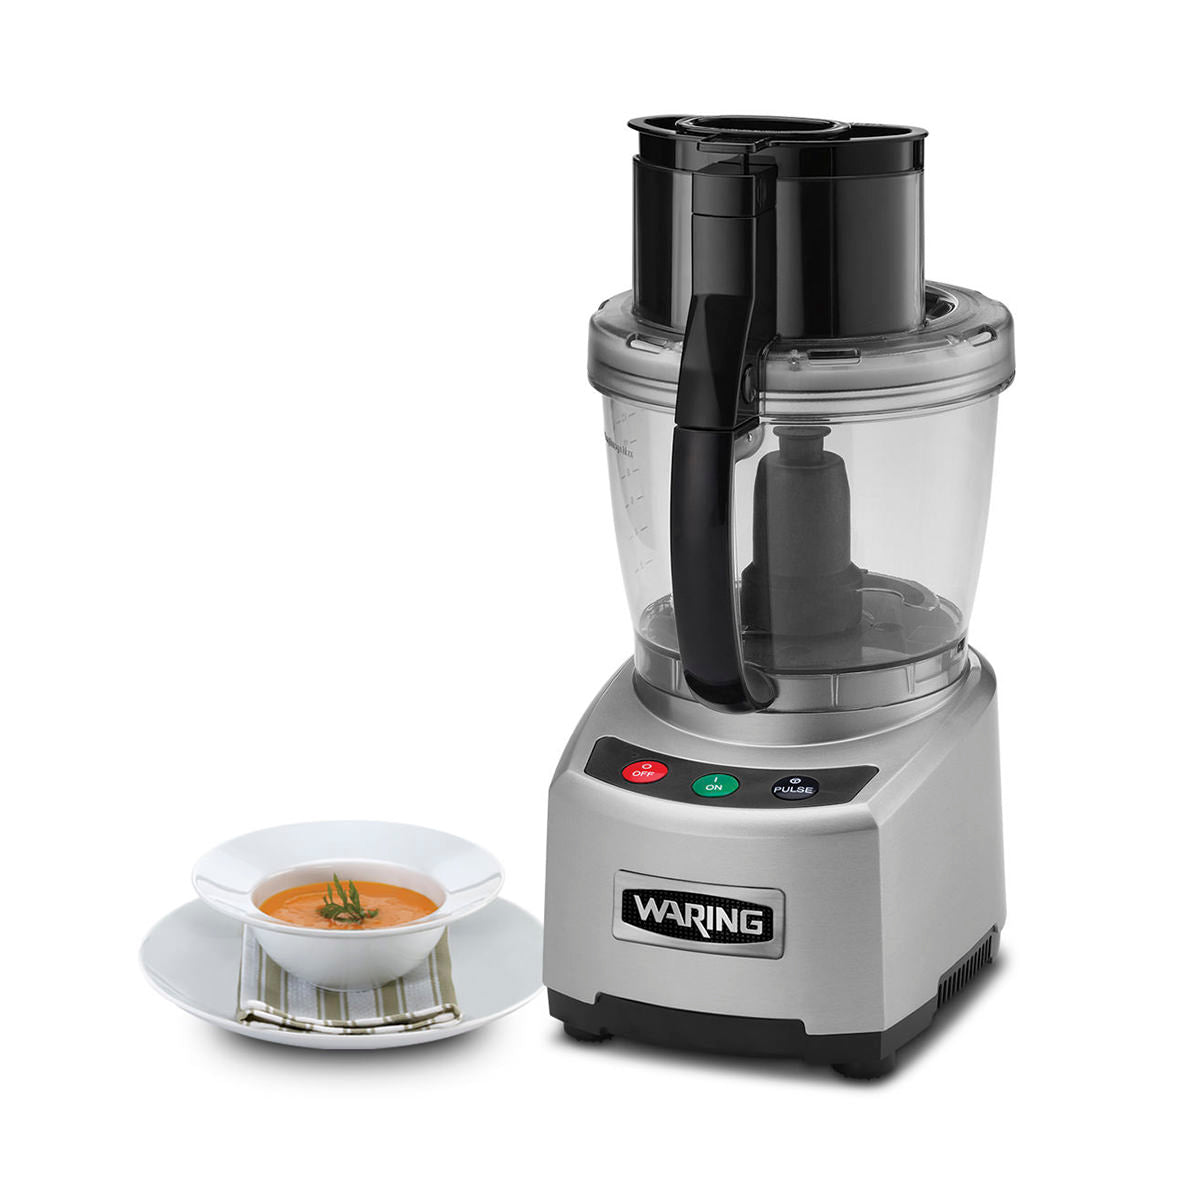 WFP16S - 4-Qt. Bowl Cutter Mixer with LiquiLock Seal System by Waring Commercial